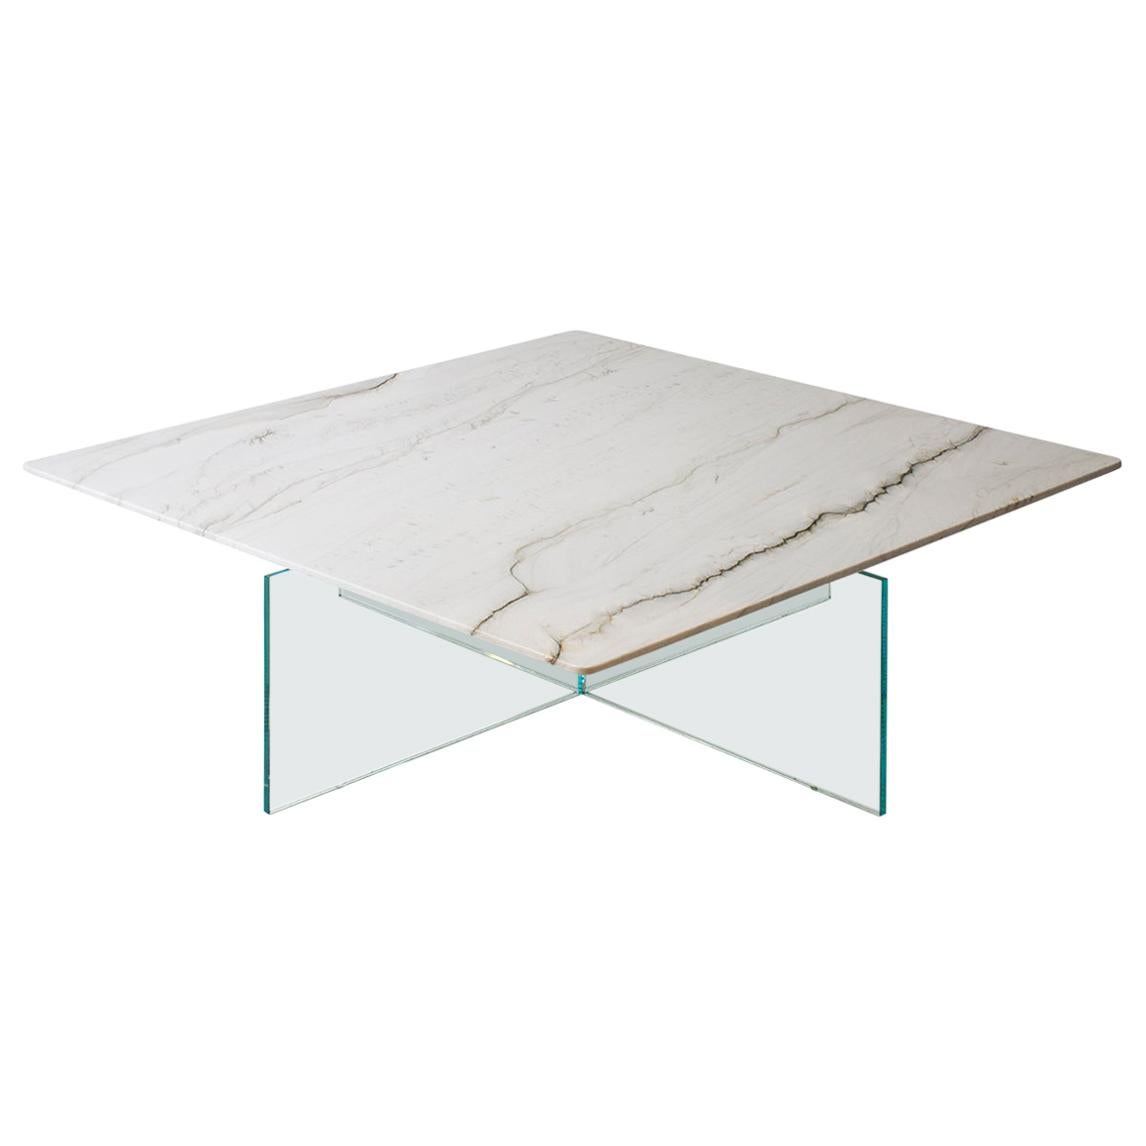 Claste Beside Myself Mini Coffee Table in Cararra Classico Marble and Glass Base For Sale